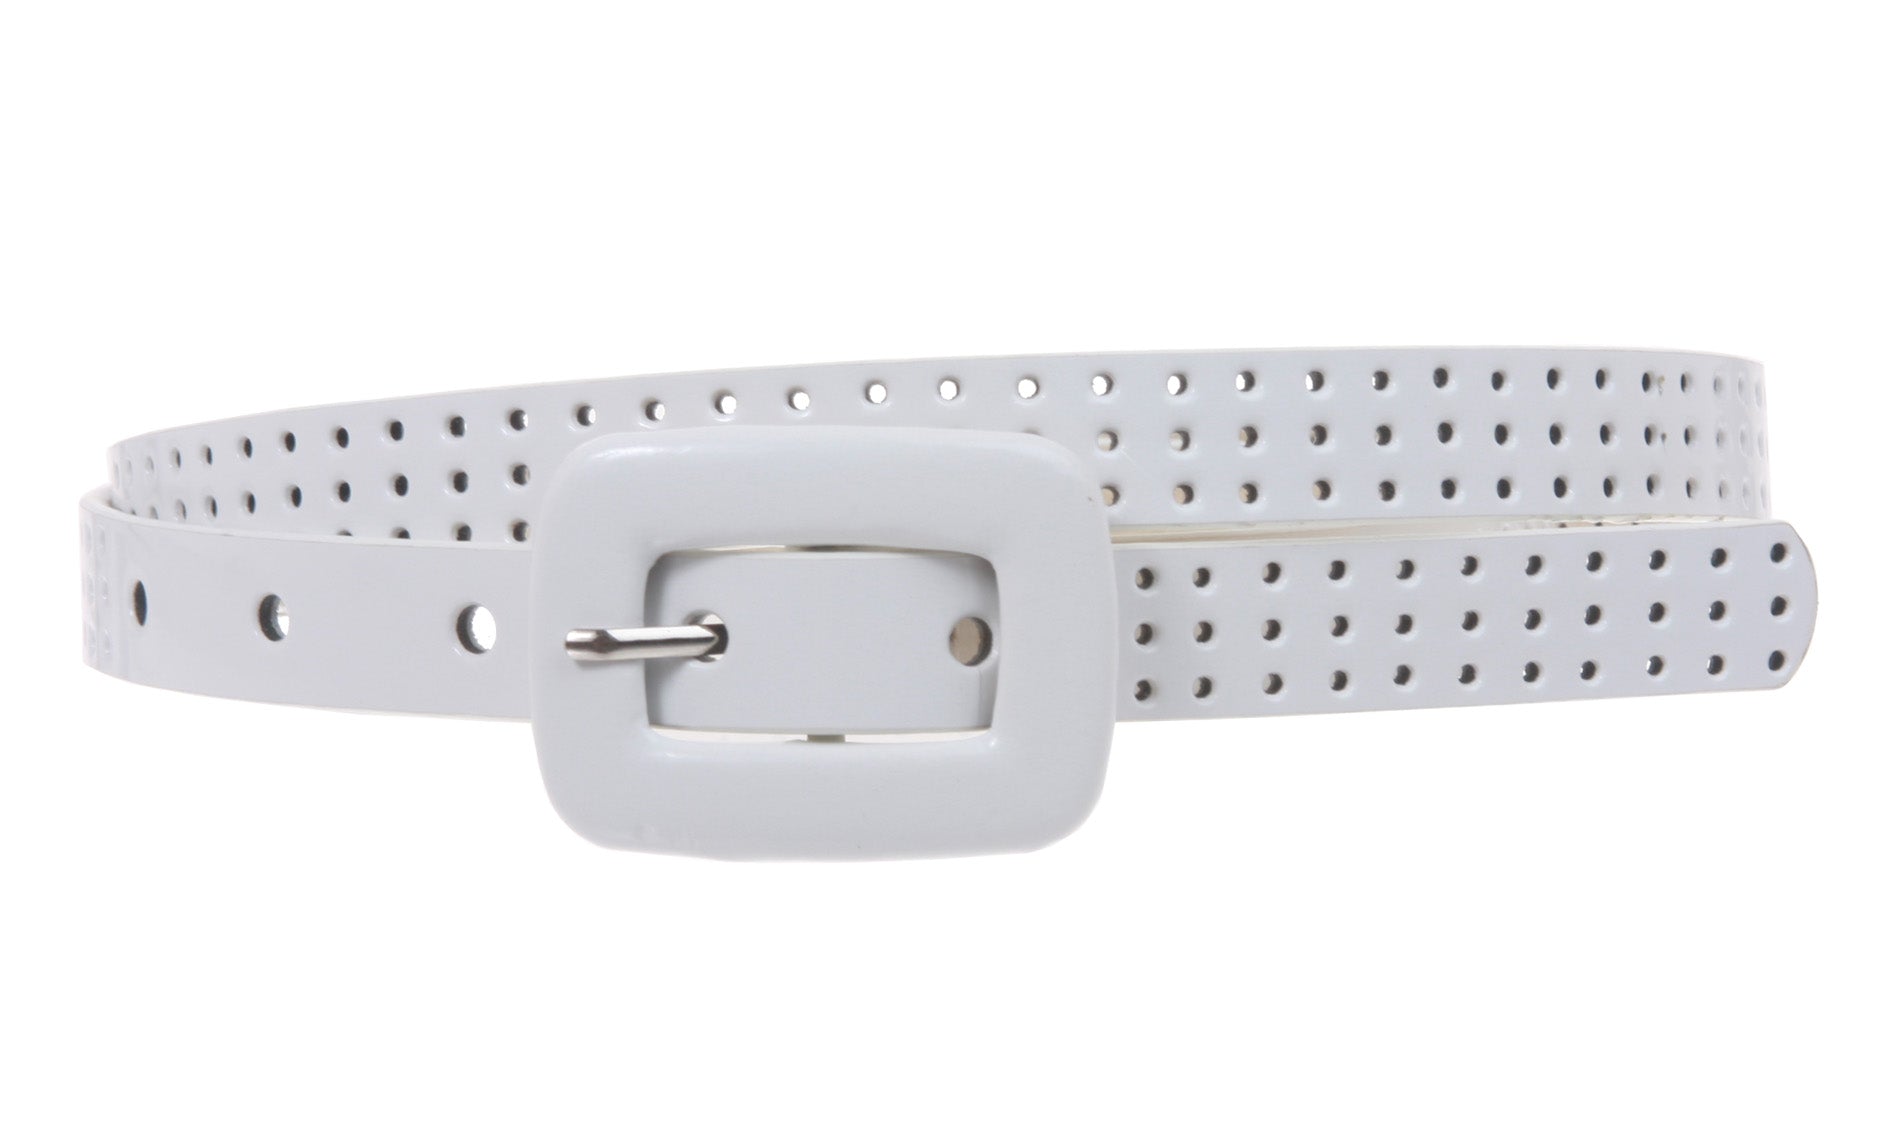 5/8 Inch Wide Patent Skinny Leather Belt